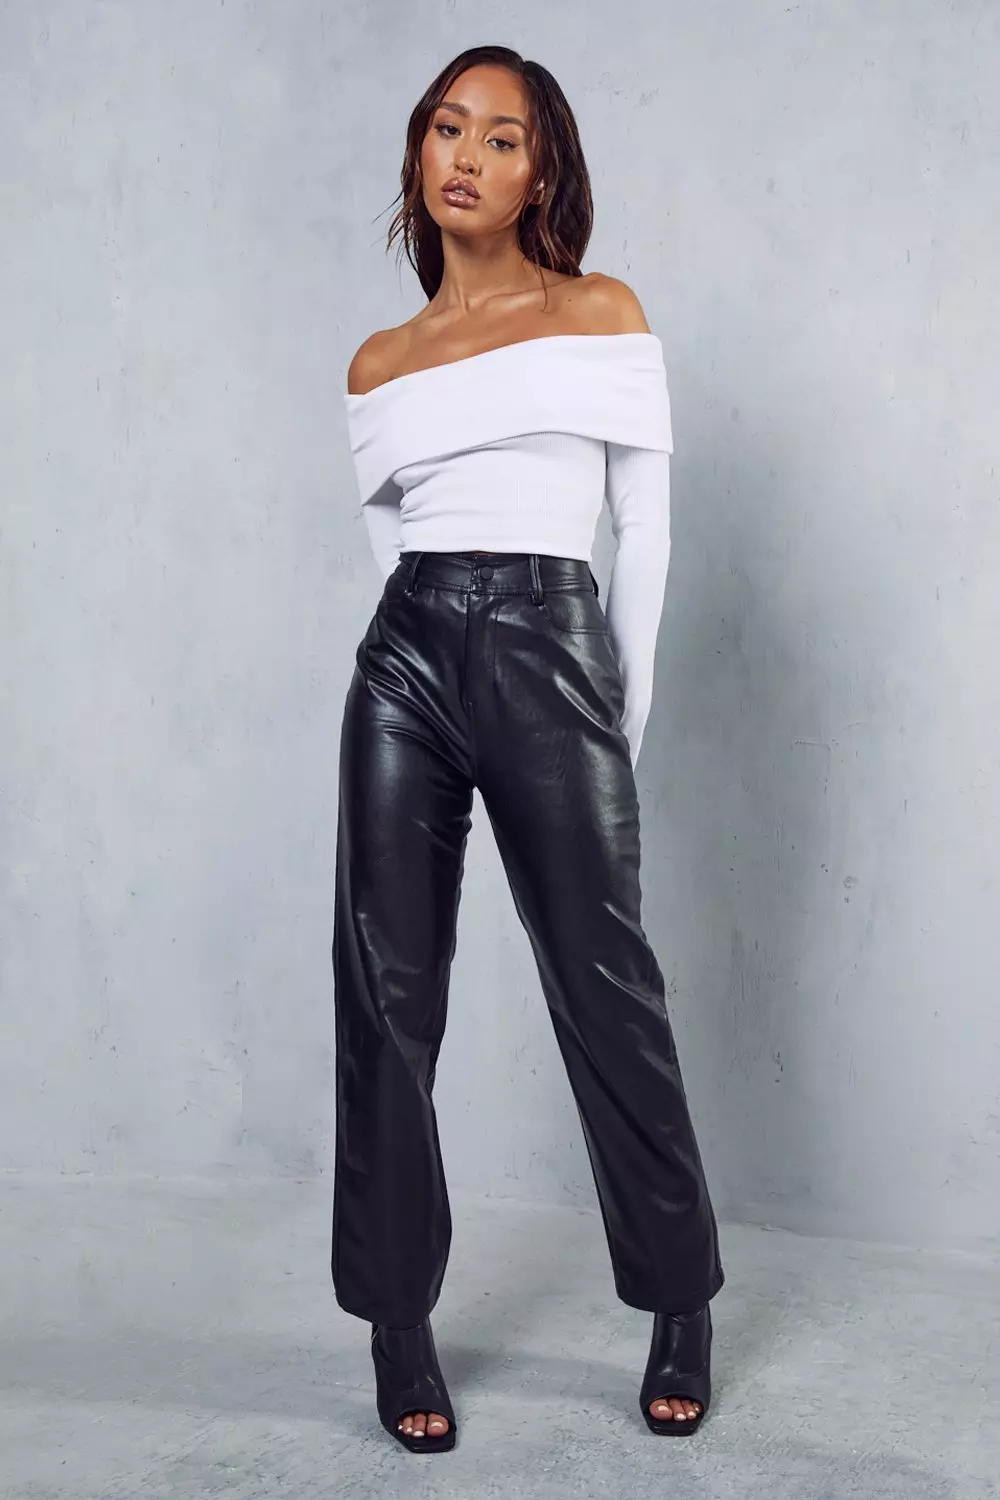 Levis Leather Pants Offers, Save 63% 